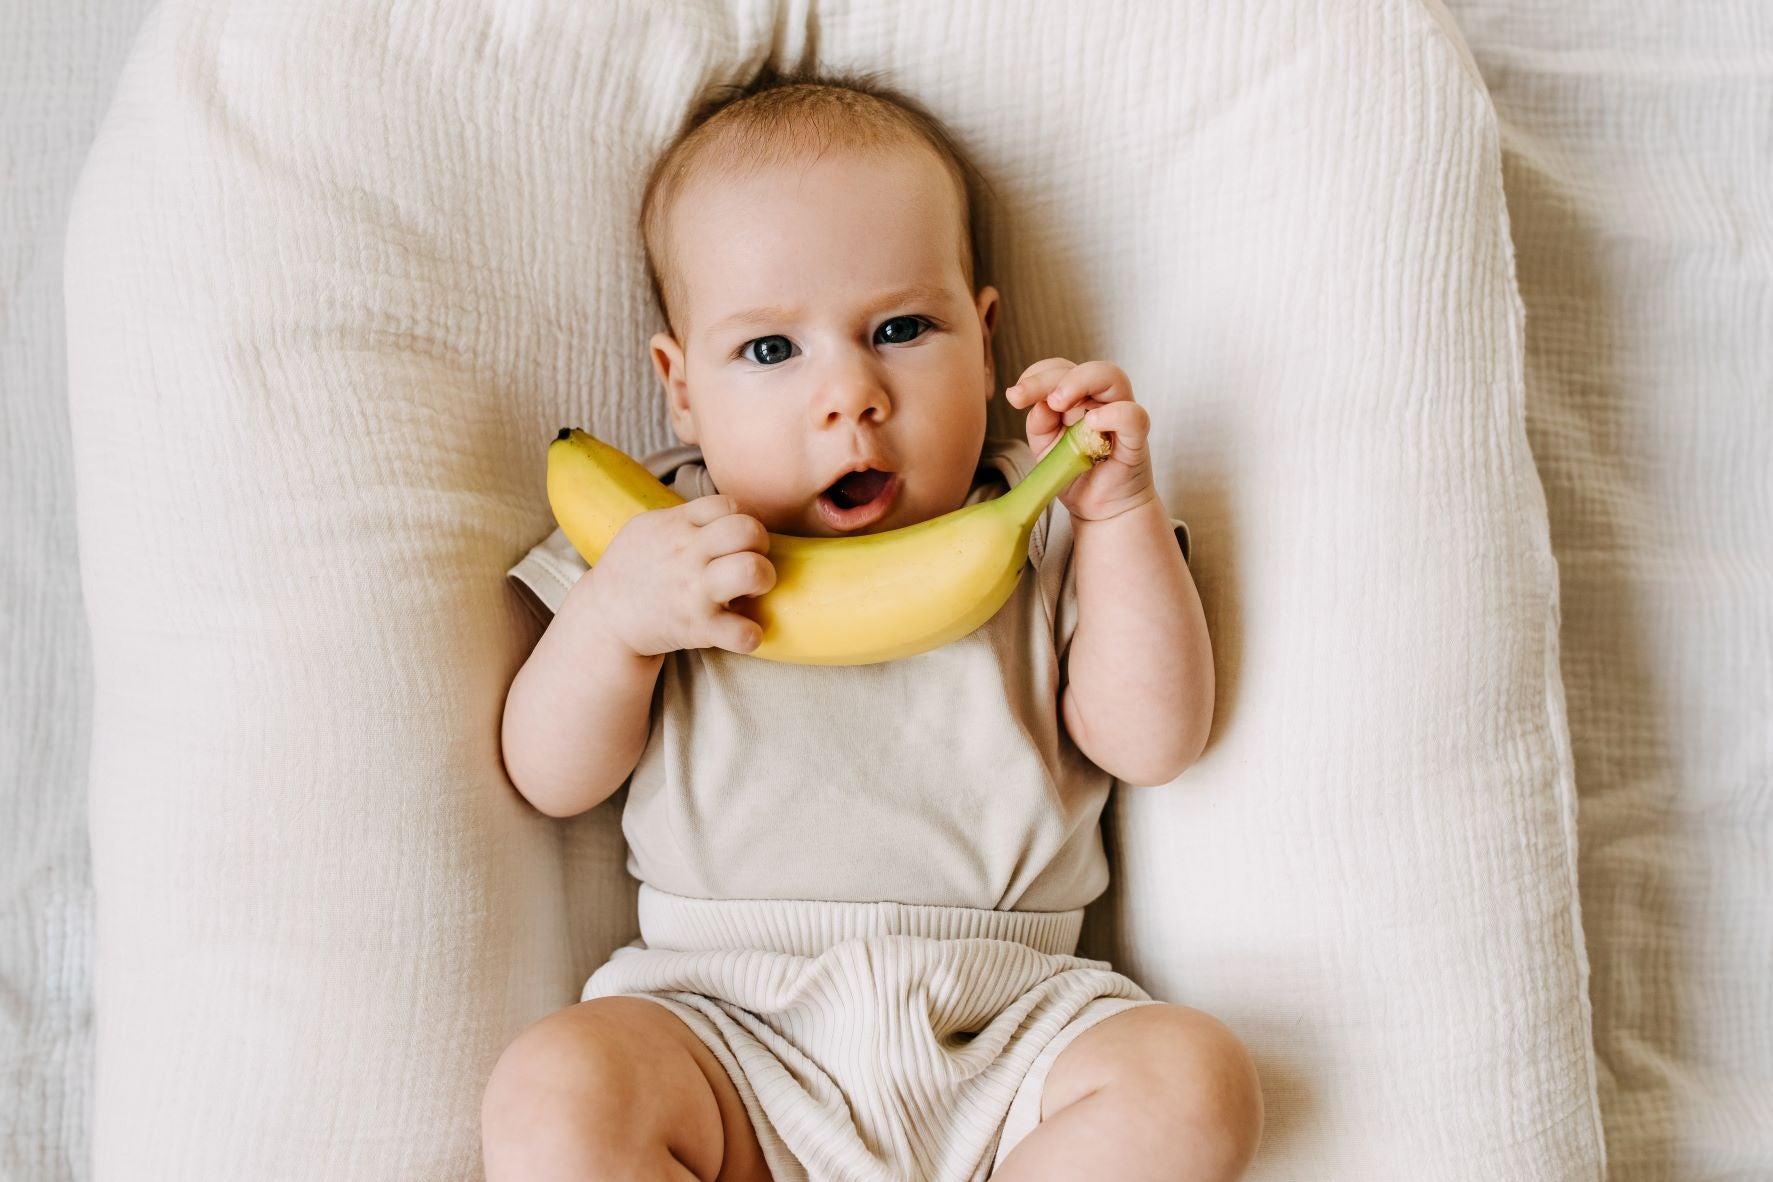 A small baby holds a banana while lying on a bed. Bananas are great first foods for babies.